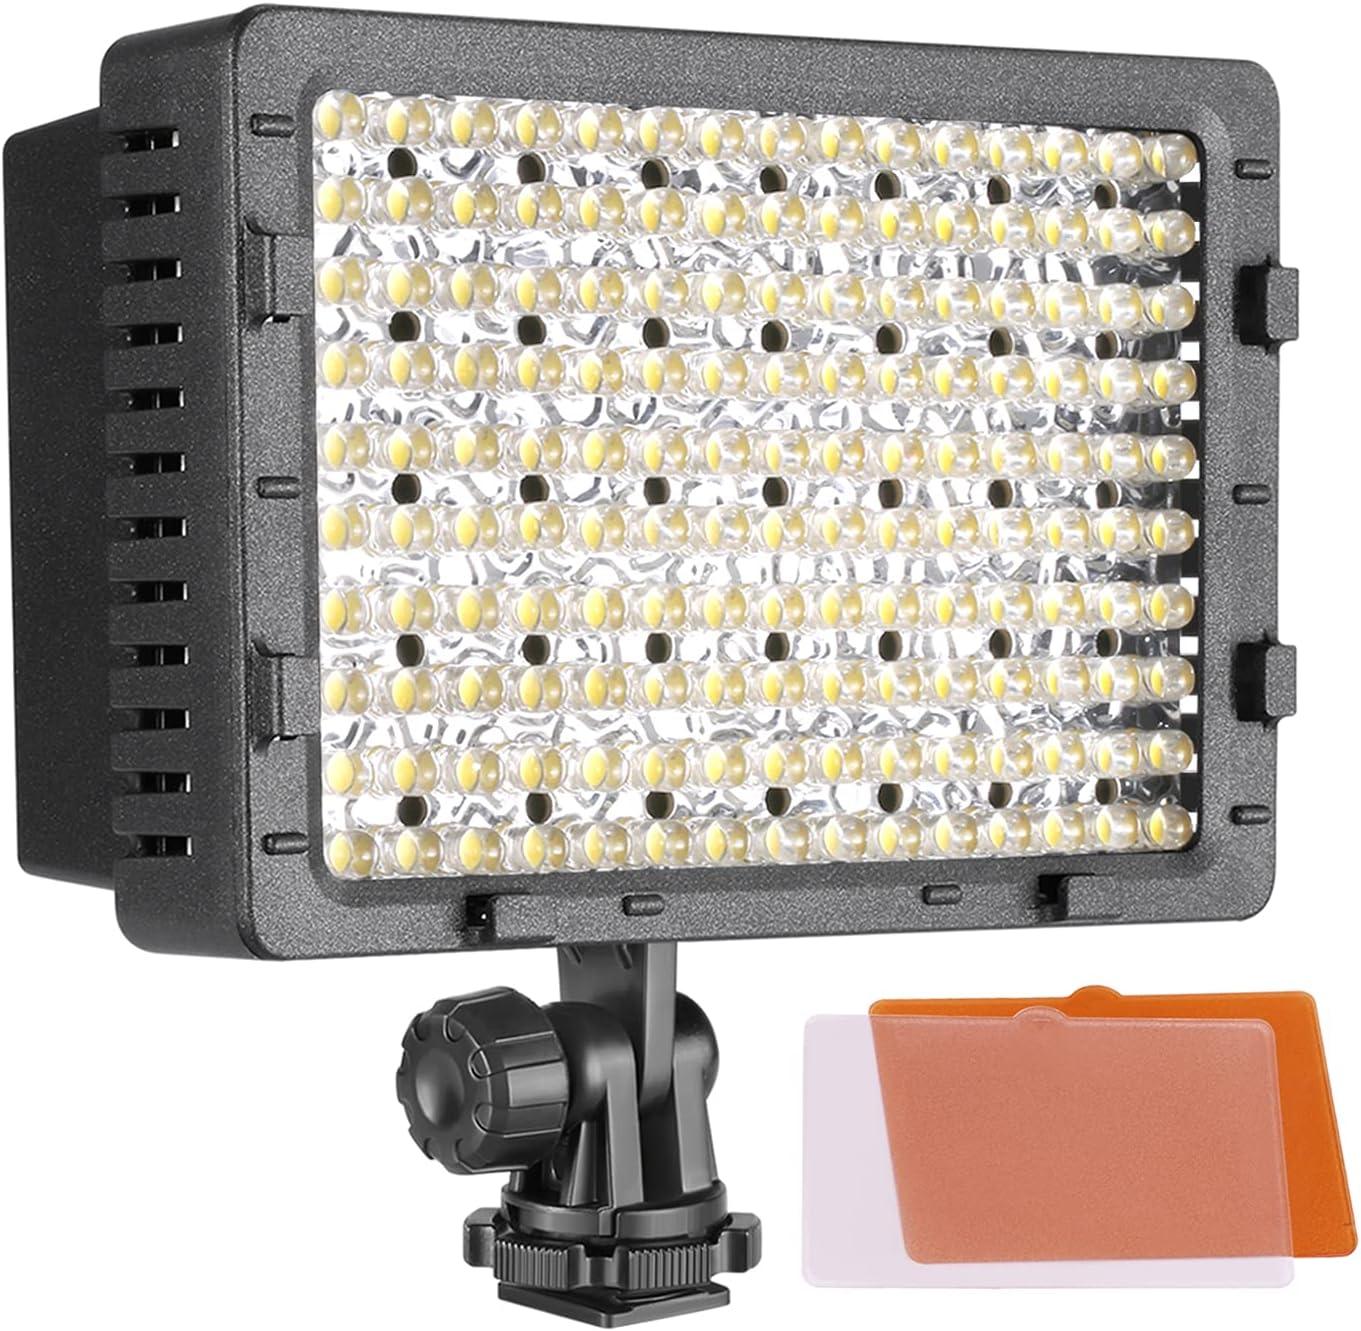 NEEWER 160 LED CN-160 Dimmable Ultra High Power Panel Digital